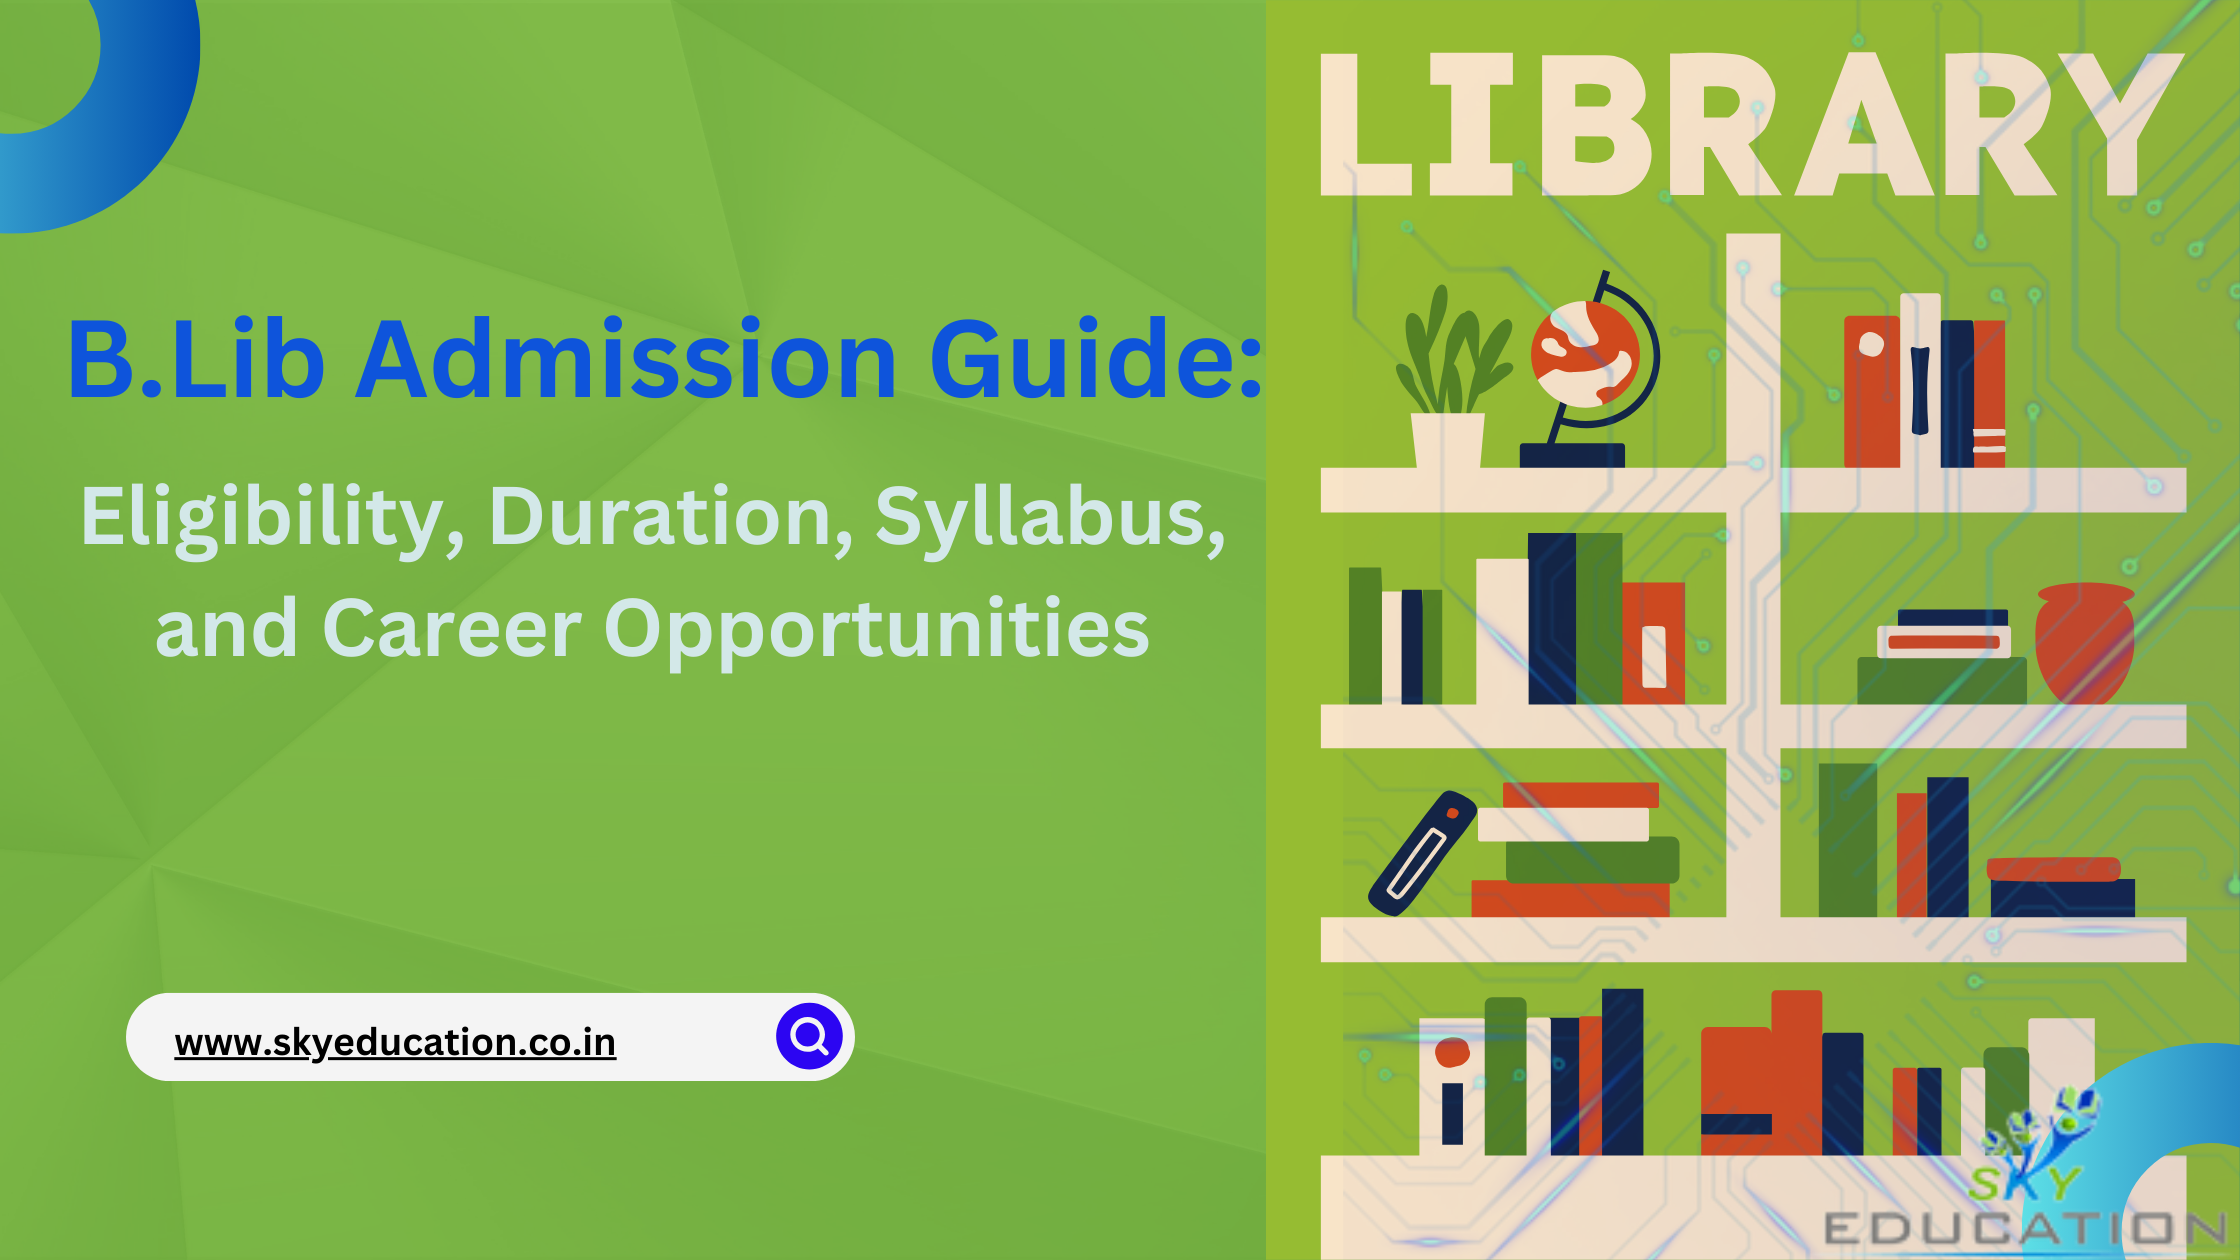 B.Lib Admission Guide: Eligibility, Duration, and Career Opportunities 'photo